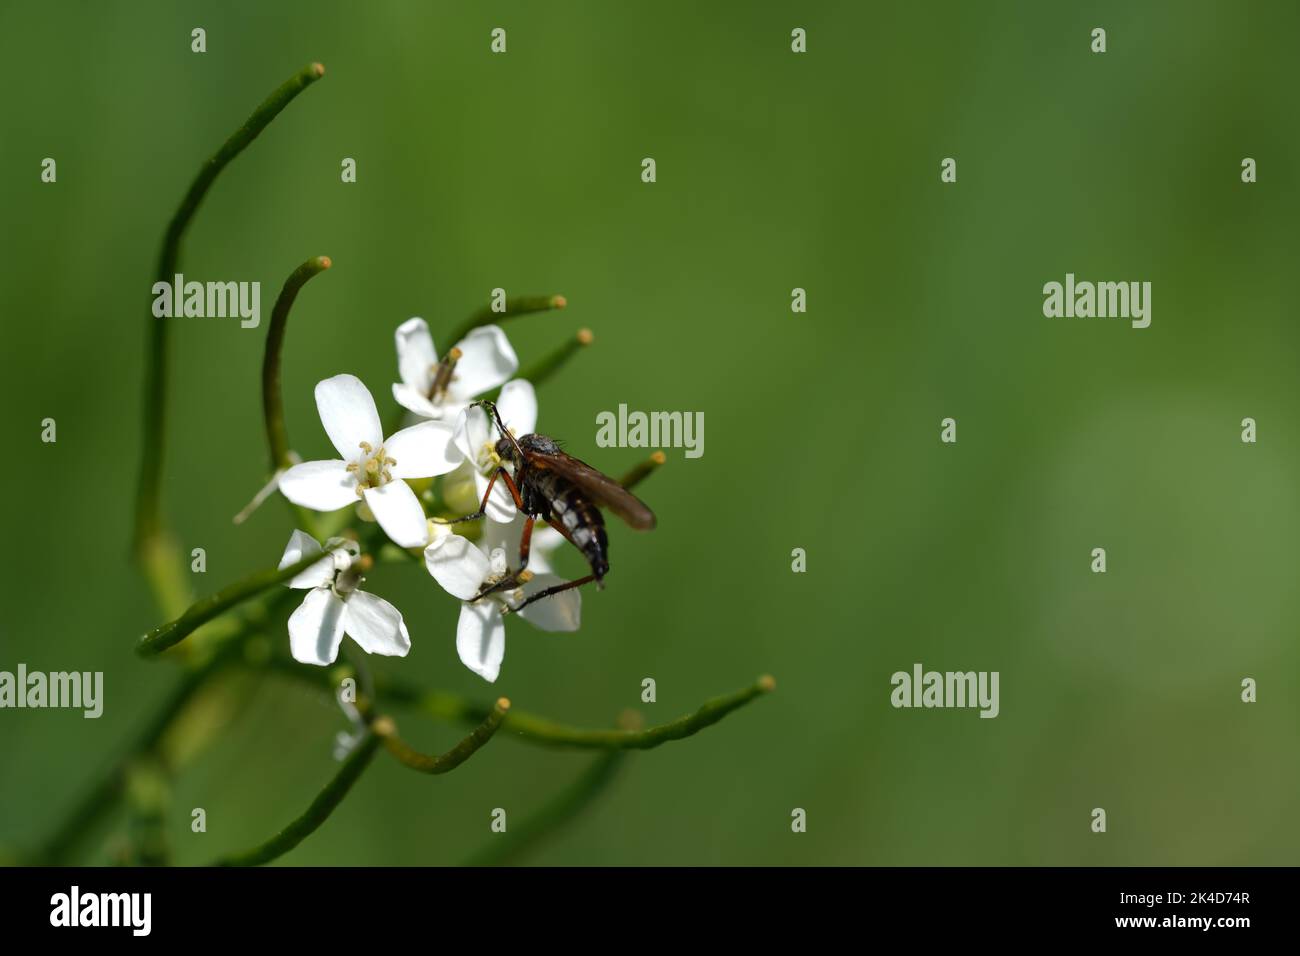 A macro shot of an insect on a Cardamine flexuosa flower shrub on a blurred background Stock Photo